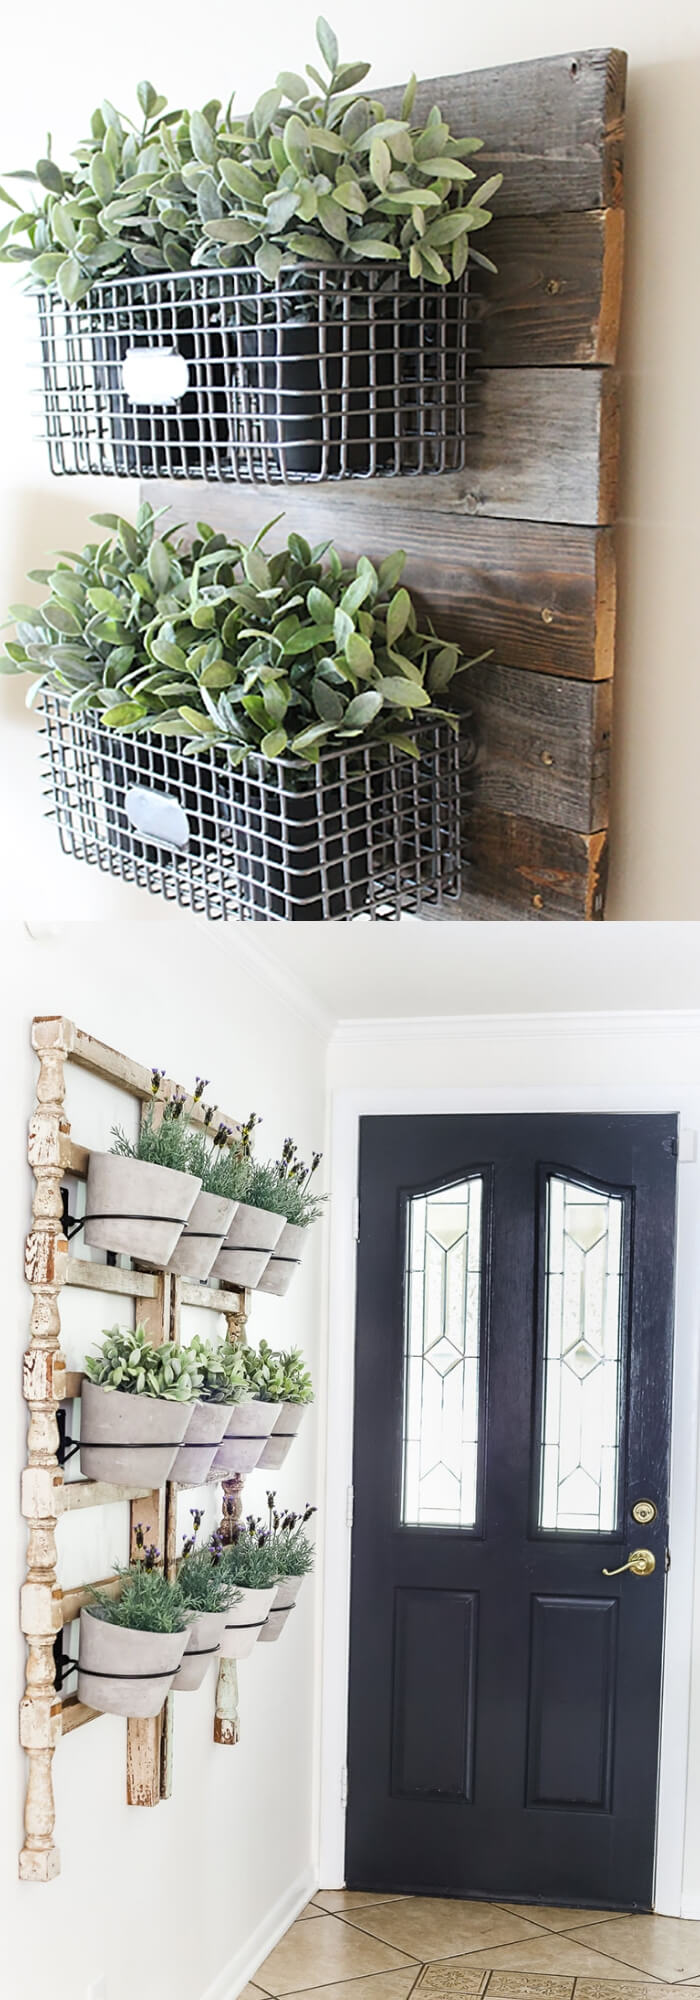 Farmhouse Hanging Wire Wall Pieces | Best Farmhouse Indoor Plant Decor Ideas & Designs